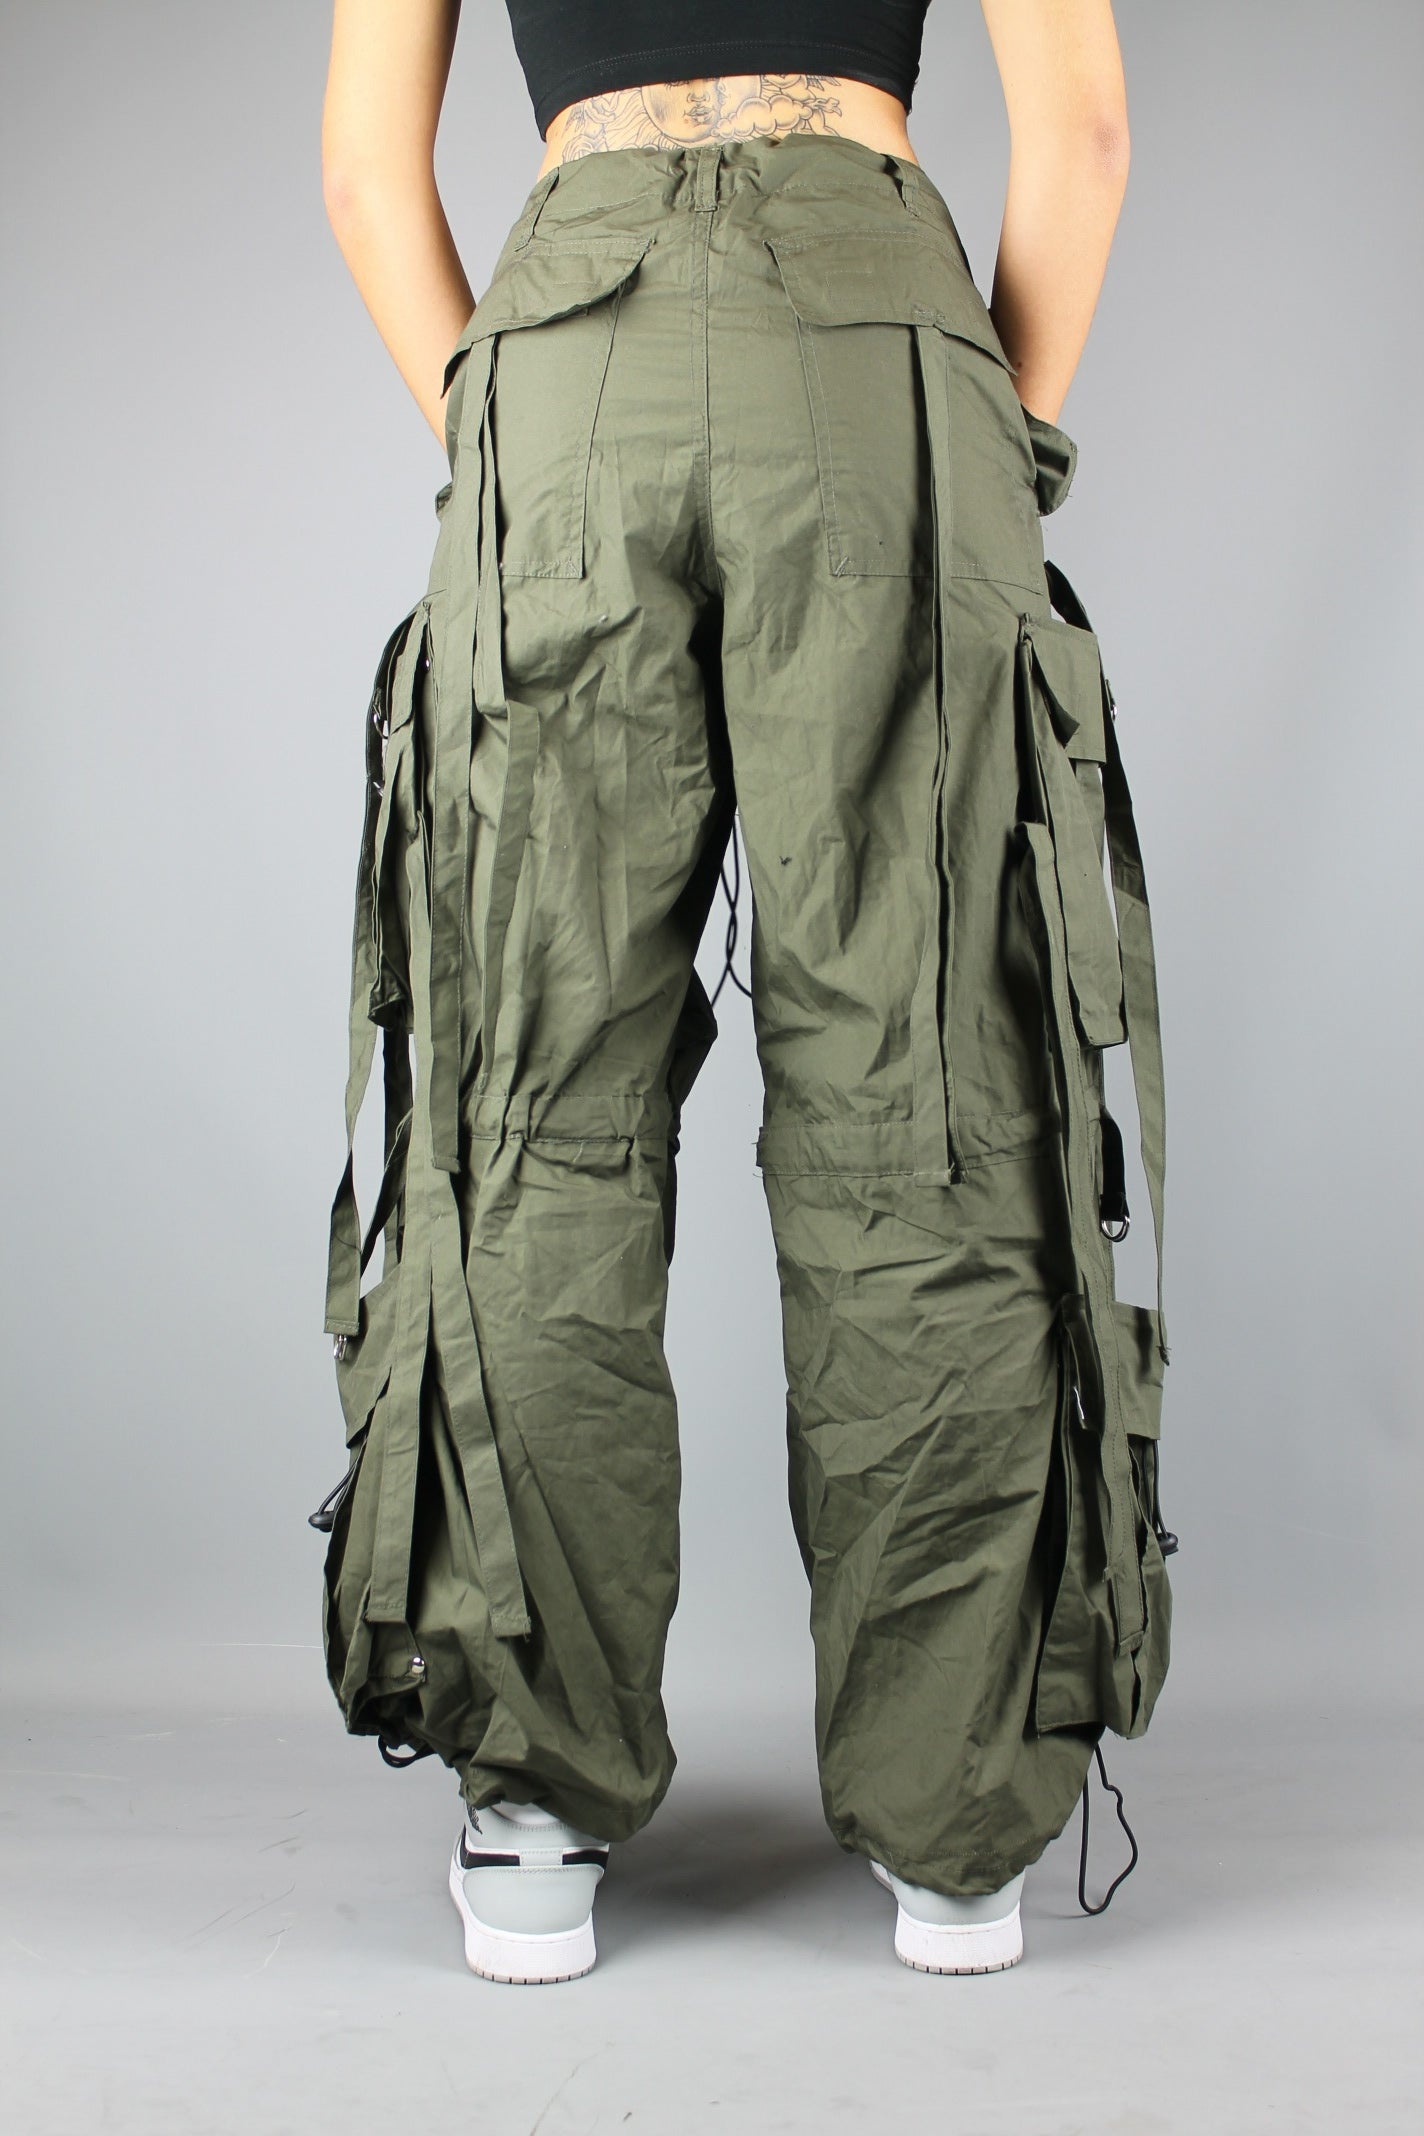 Unbranded Baggy Fit Parachute Strap Cargo Pants Trousers Dark Oliv